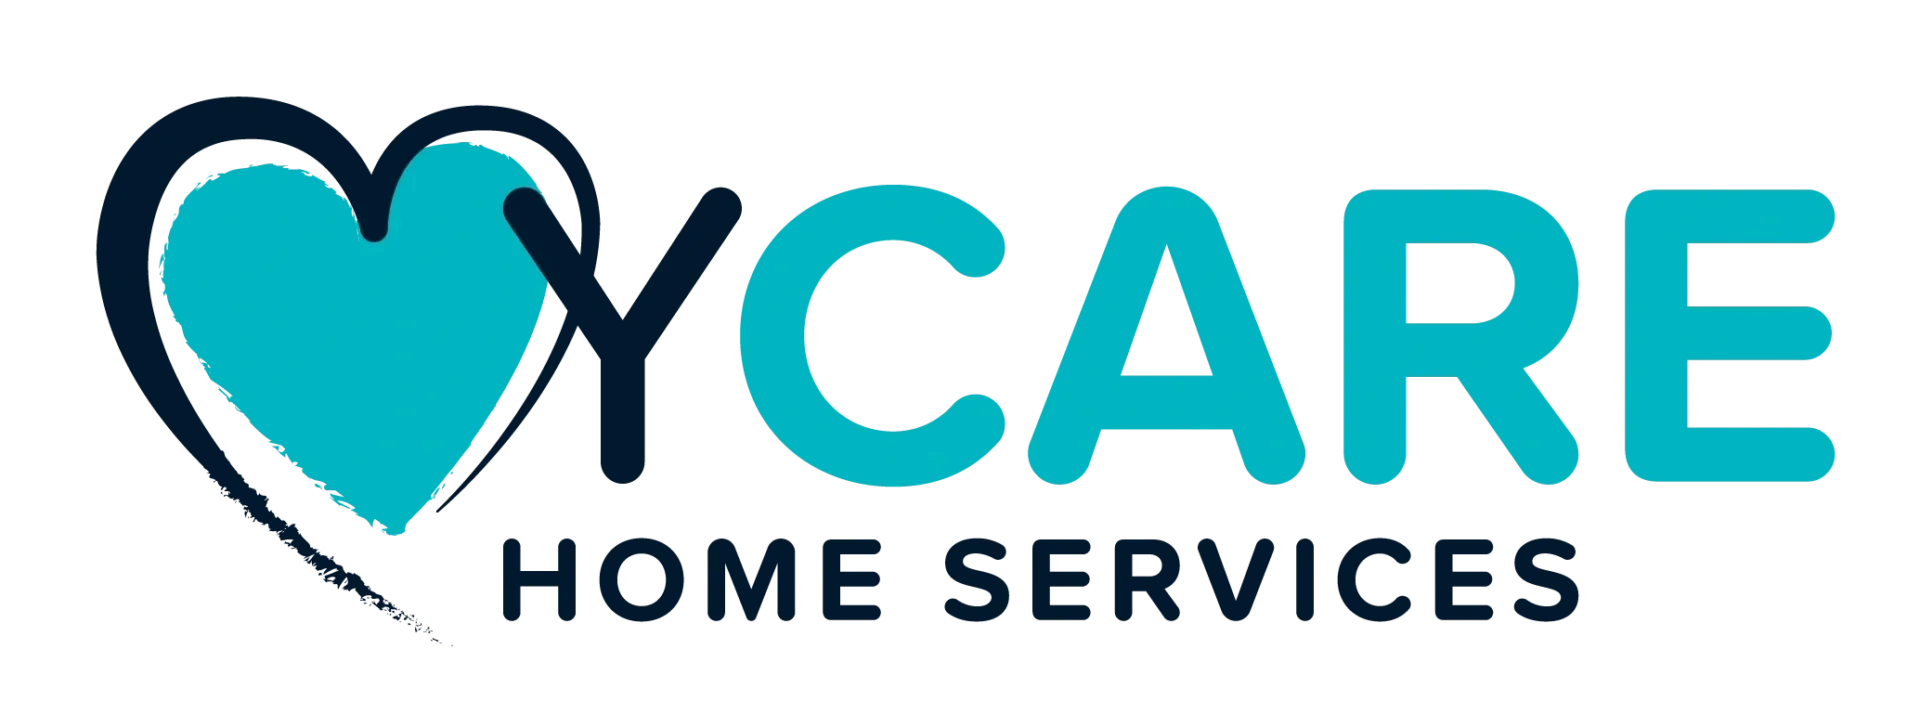 A blue and black logo for yca home service.